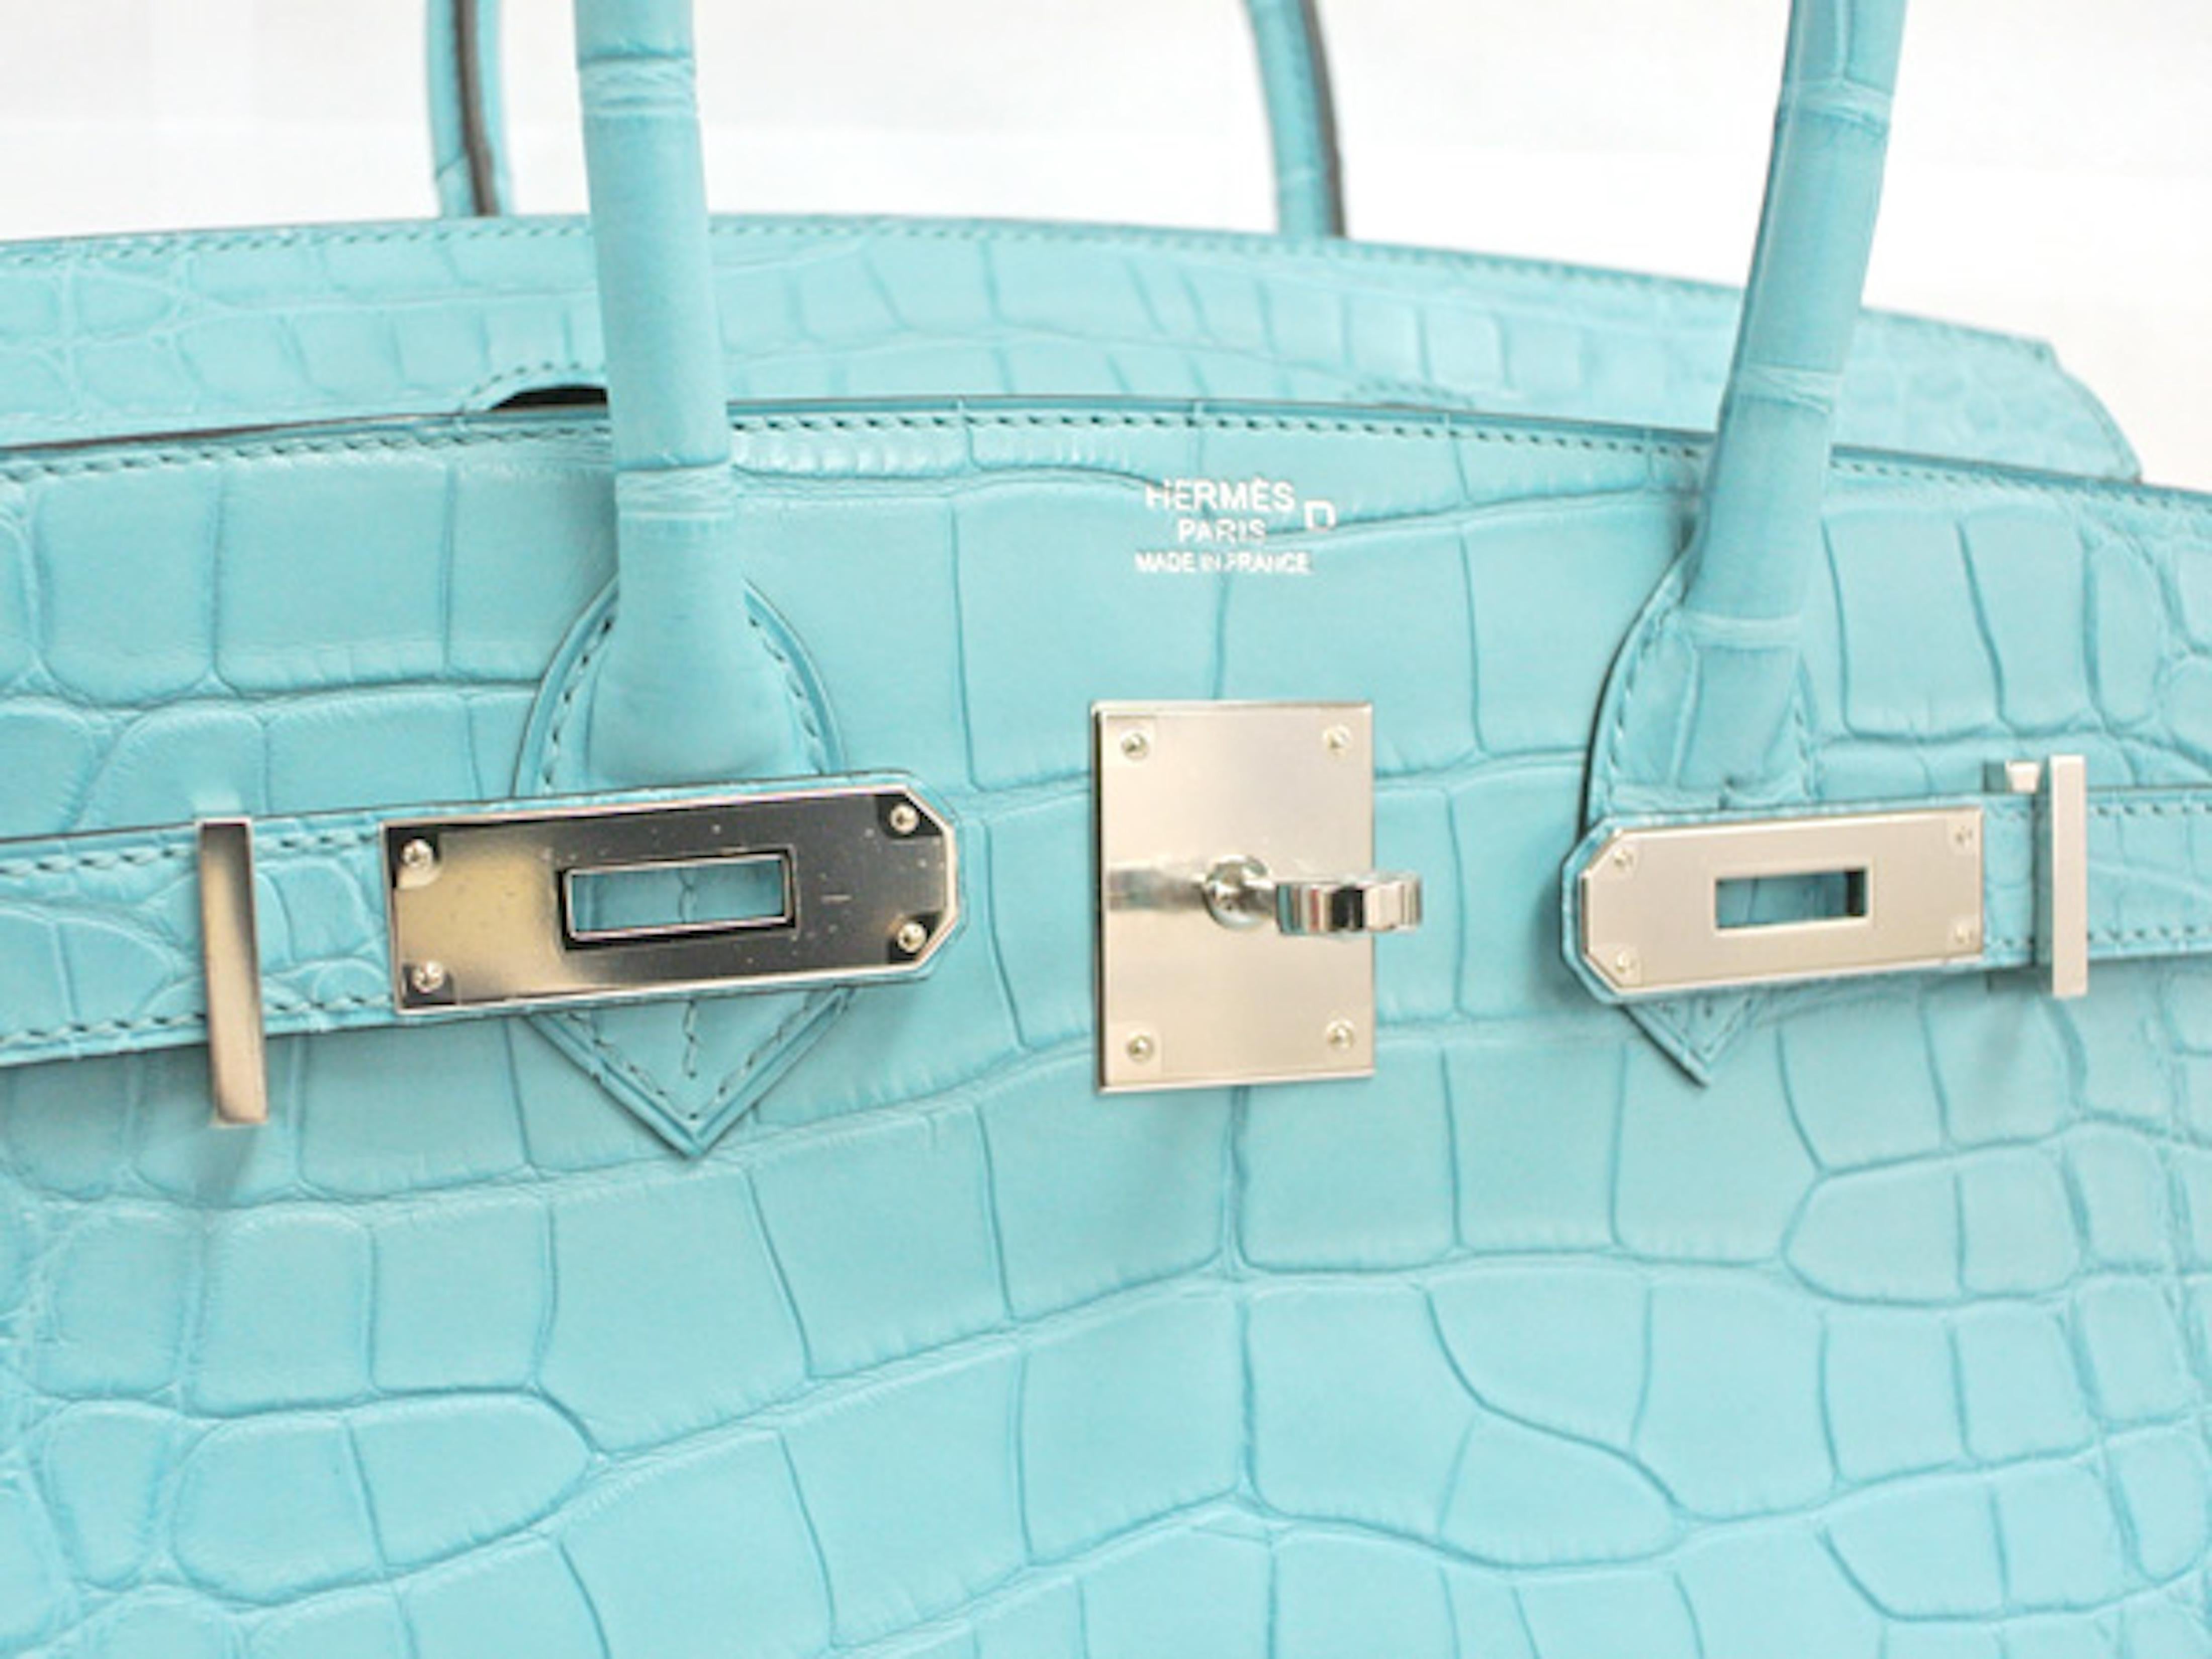 Your Exclusive Exotic Hermes Birkin Has Arrived.  

Combining beautiful baby blue matte alligator skin, this brand new Hermes Birkin 30 is a special treat and rare find unlike any other out of the French fashion house. Featuring stunning palladium